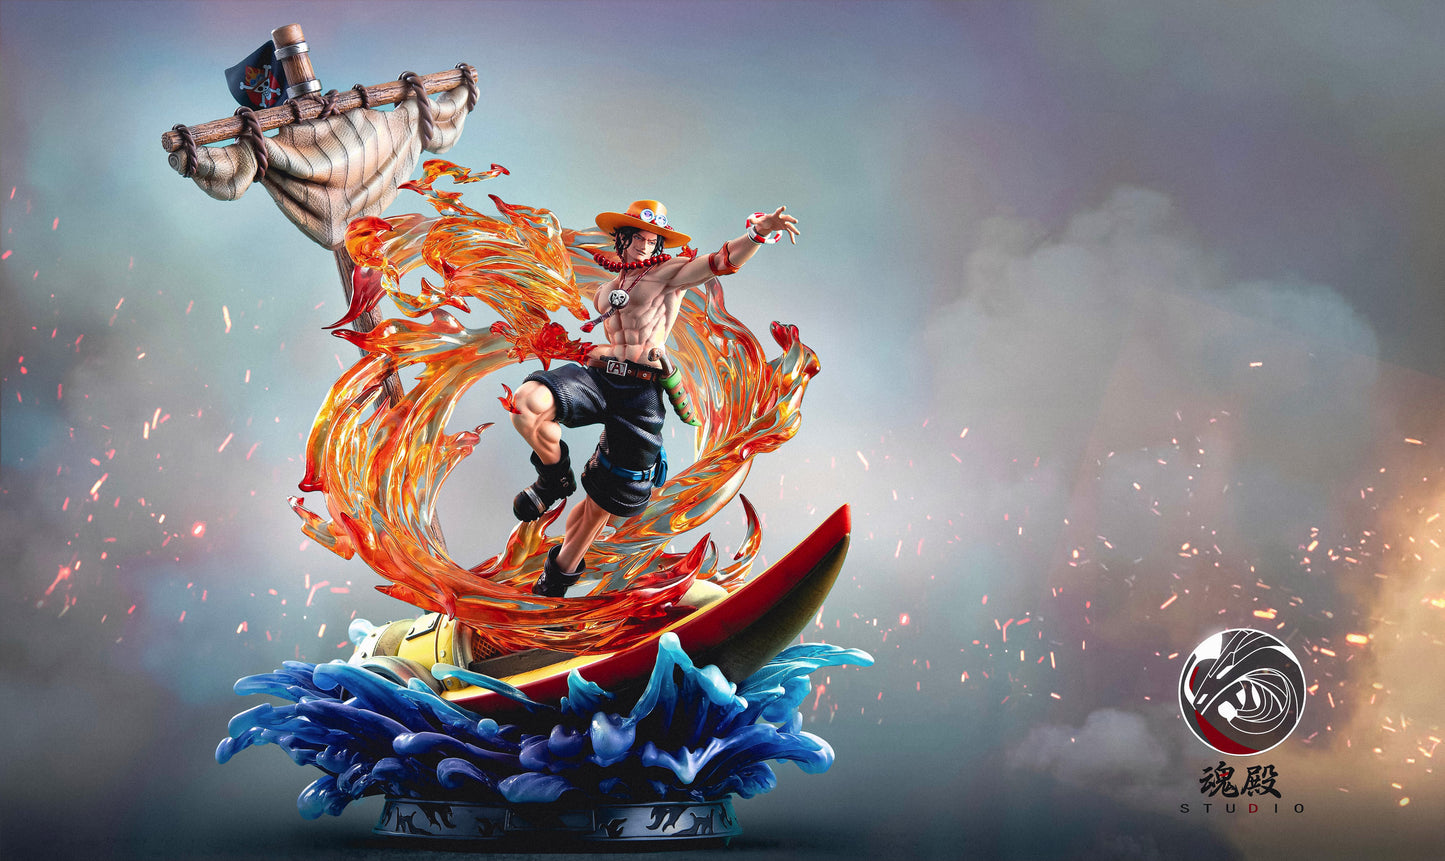 HUN DIAN STUDIO – ONE PIECE: FIRE FIST ACE [SOLD OUT]